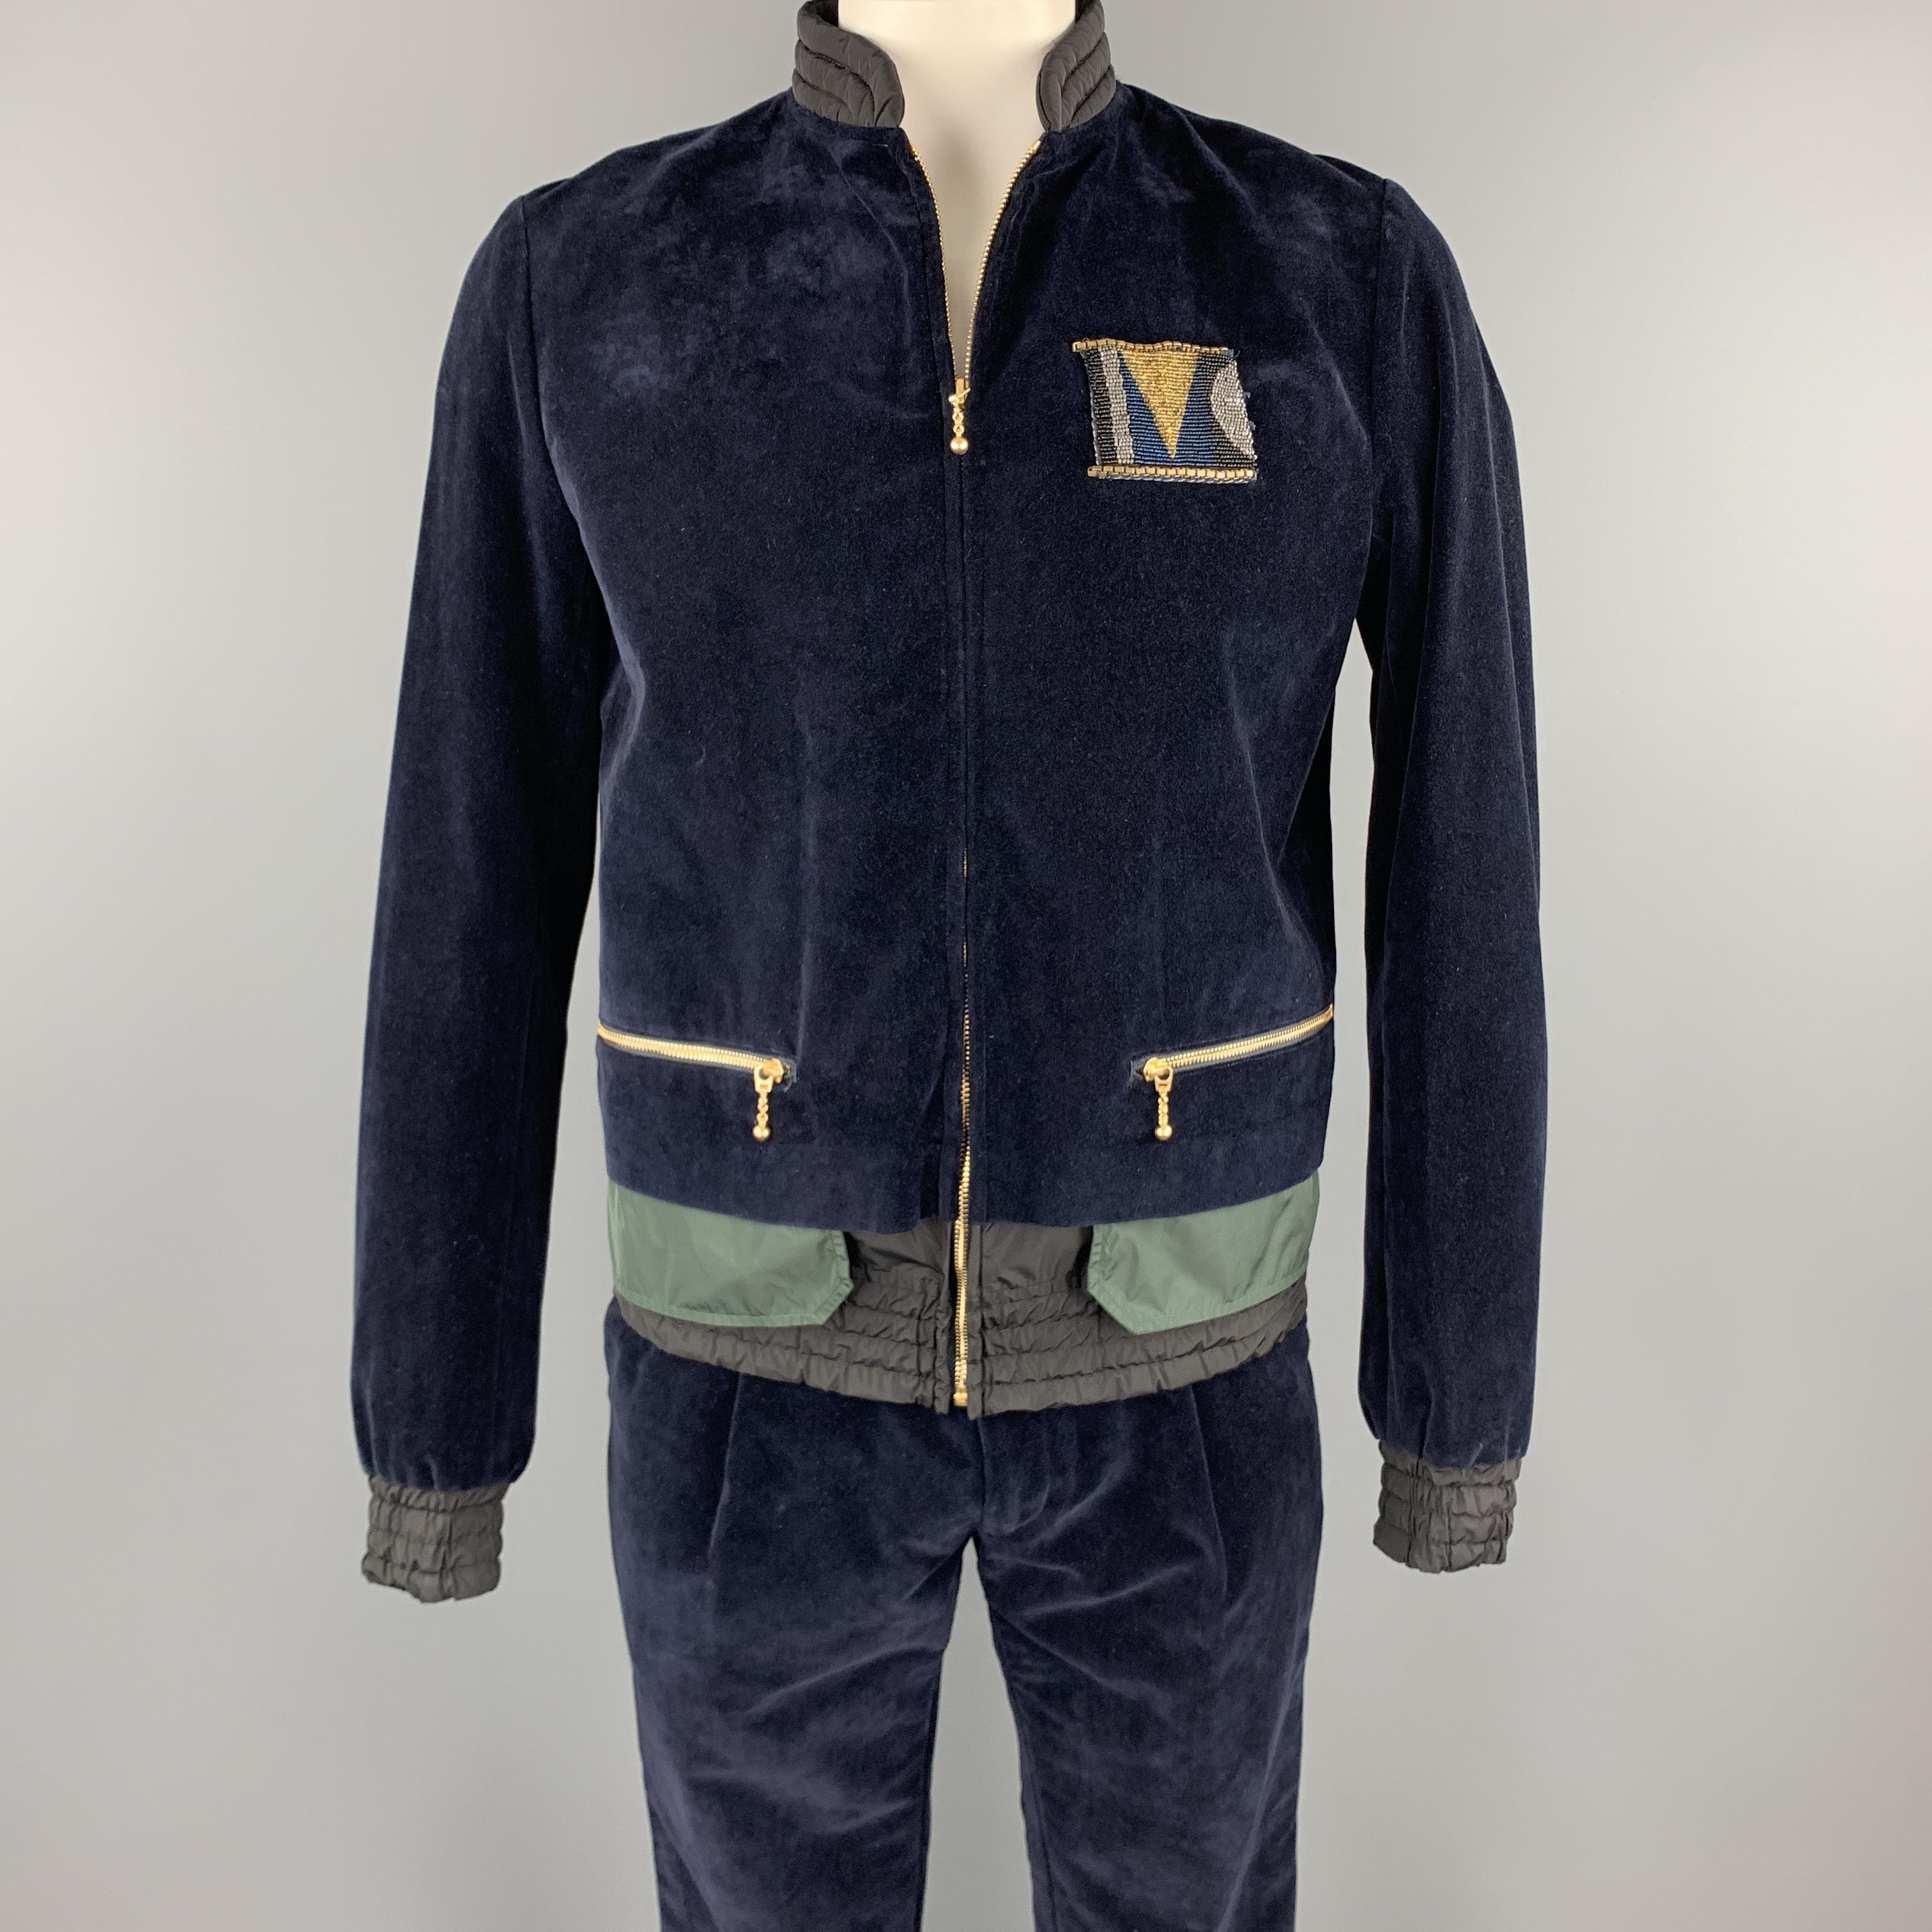 KOLOR track suit comes in a navy velvet with mixed material details featuring a front beaded detail, quilted collar, front pockets, zip up closure and matching jogger pants. Made in Japan.

New With Tags.
Marked: 4
Original Retail Price: